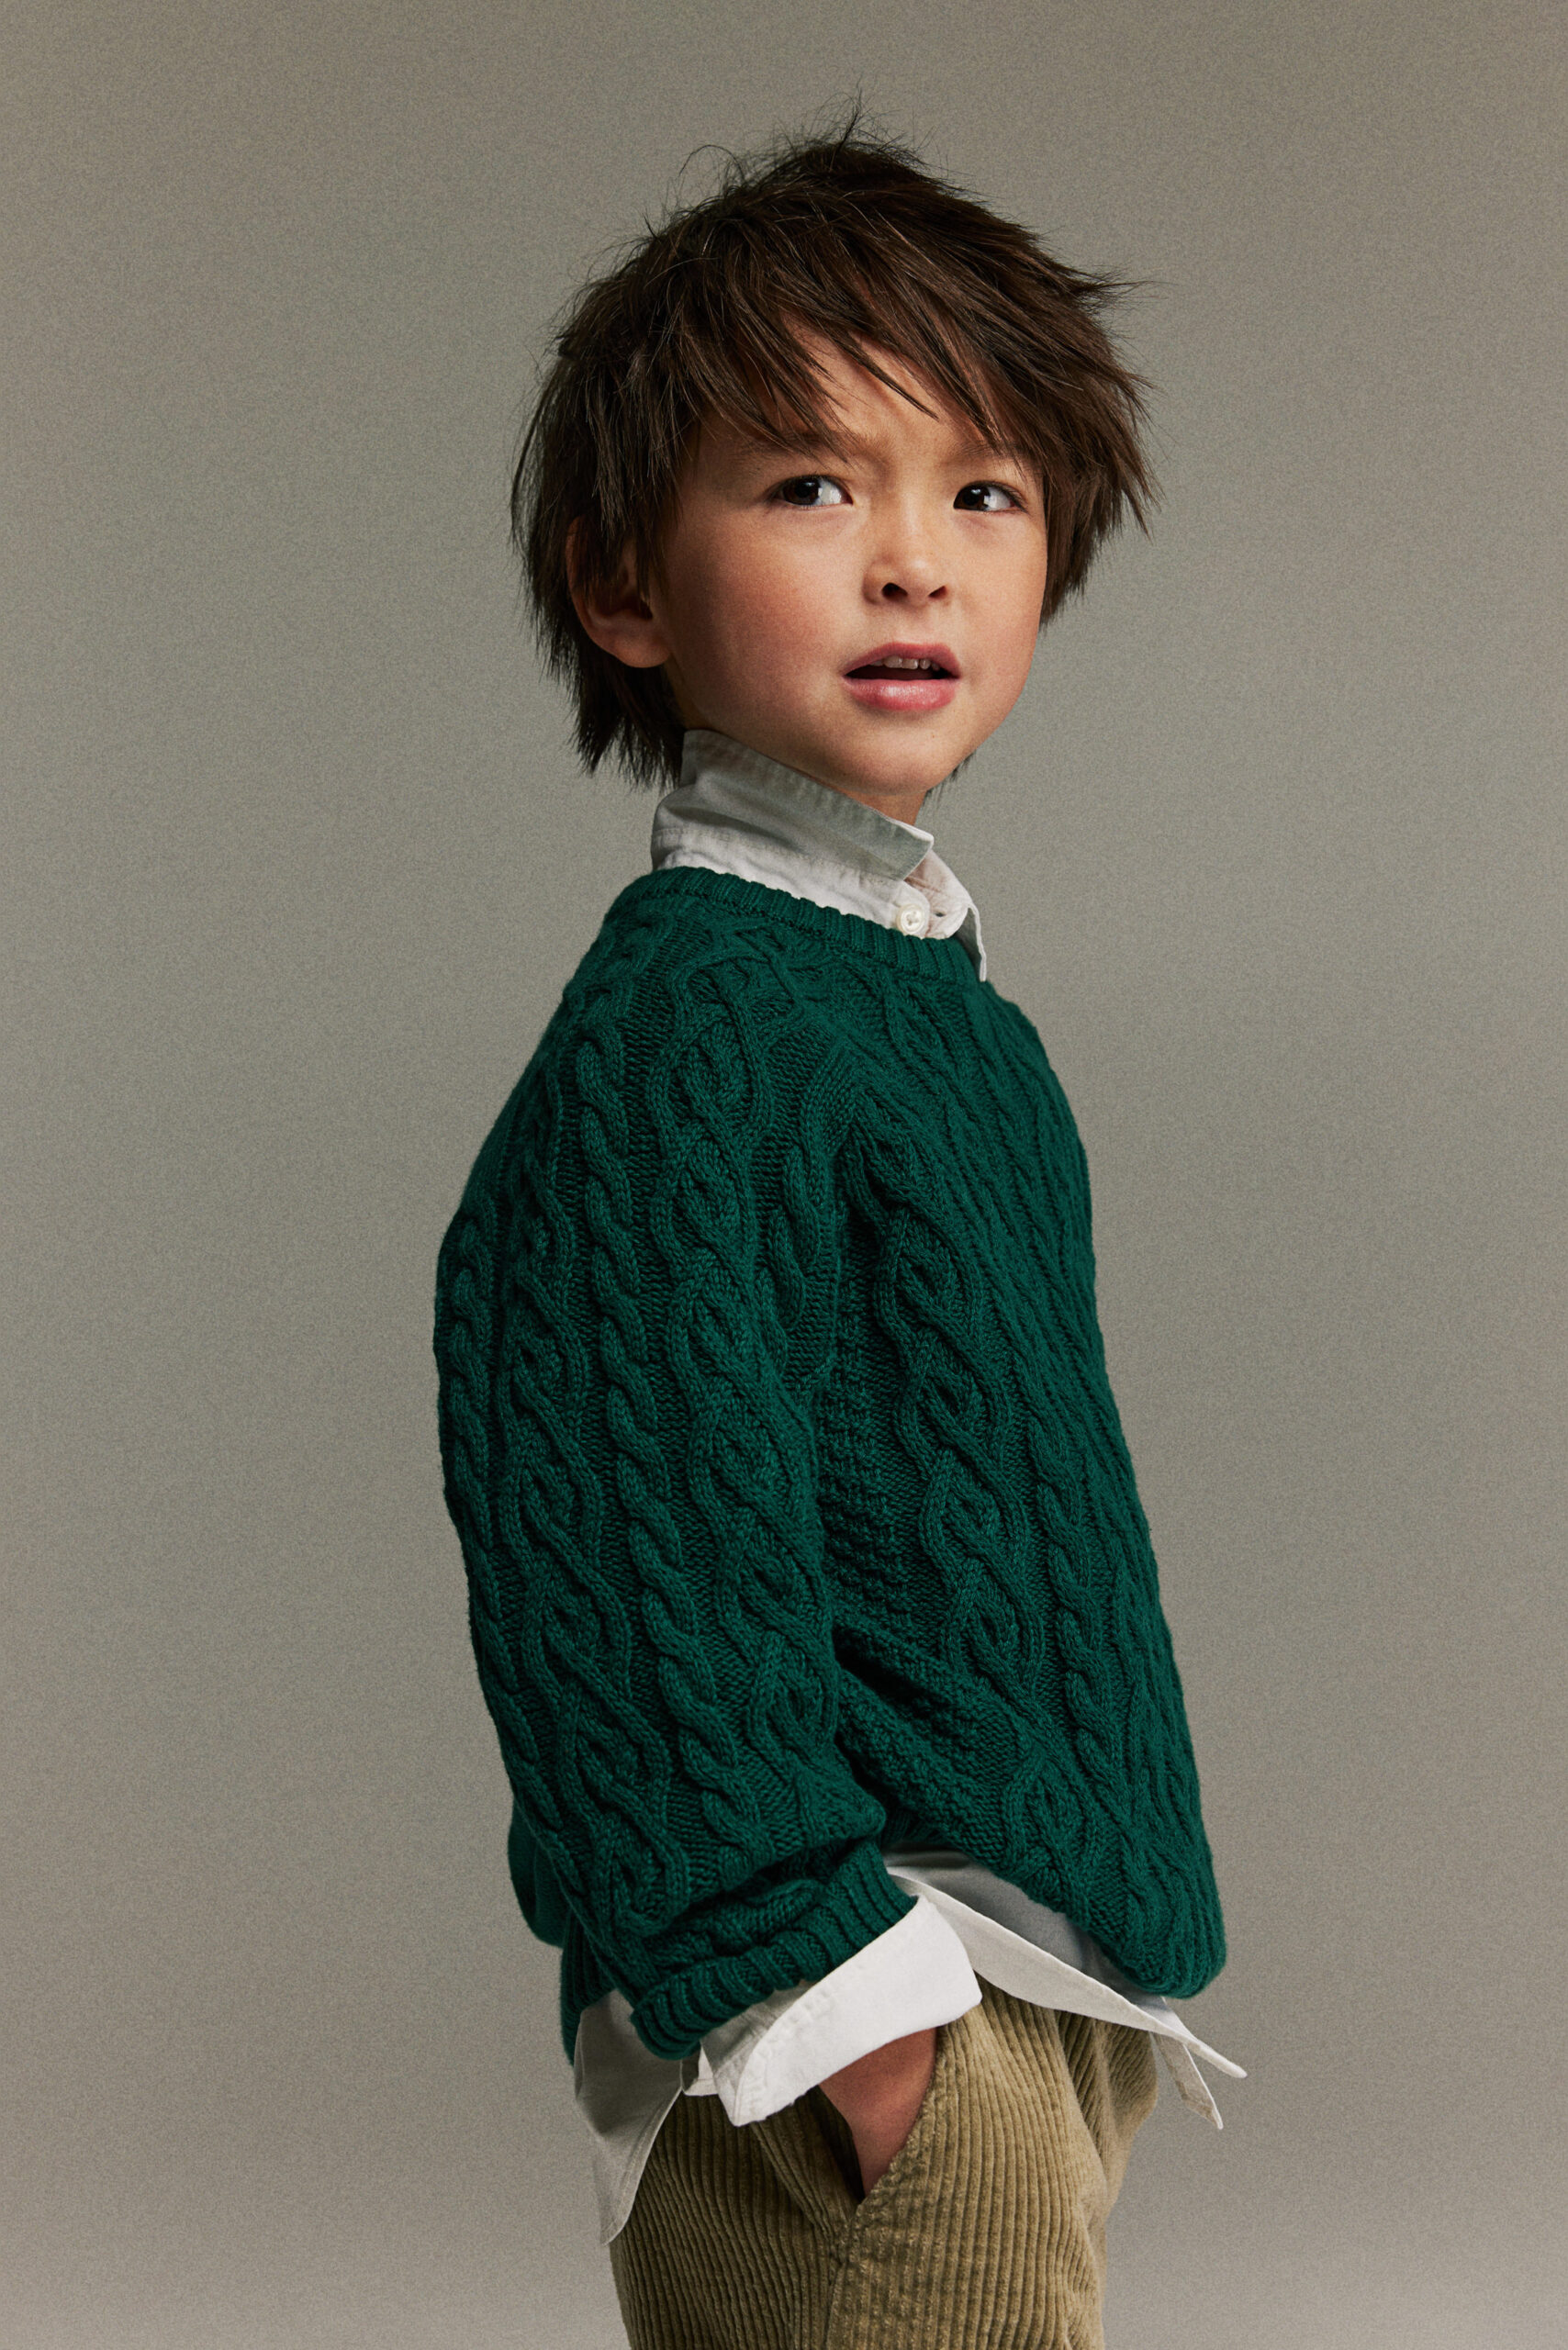 Boy wearing forest green knit sweater from H&M.